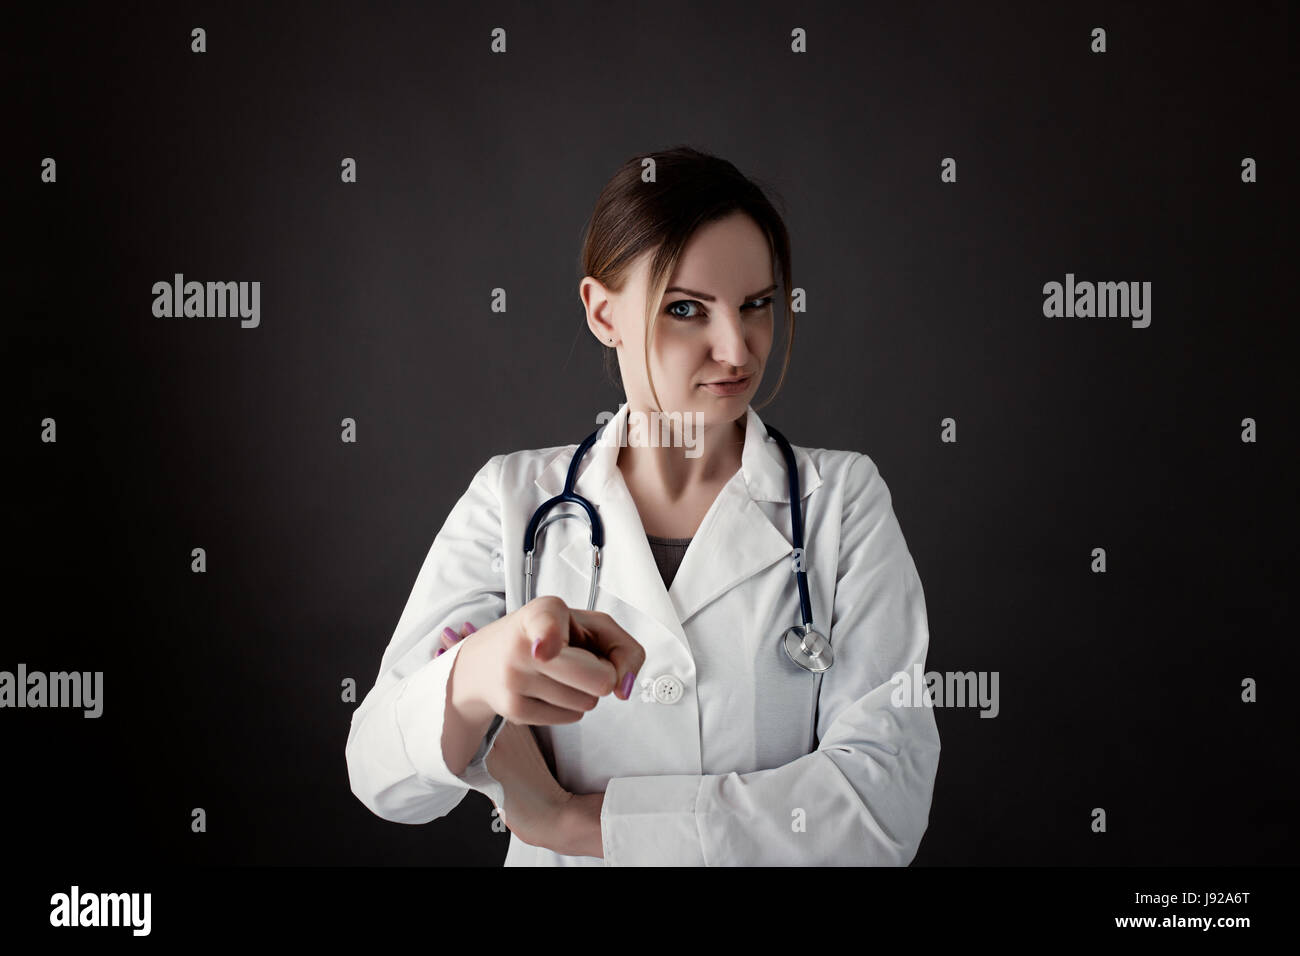 Radiology, gynecology, therapeutic or traumatology concept. Medical care or insurance concept. Female Intern hold stethoscope and smiling. phonendosco Stock Photo